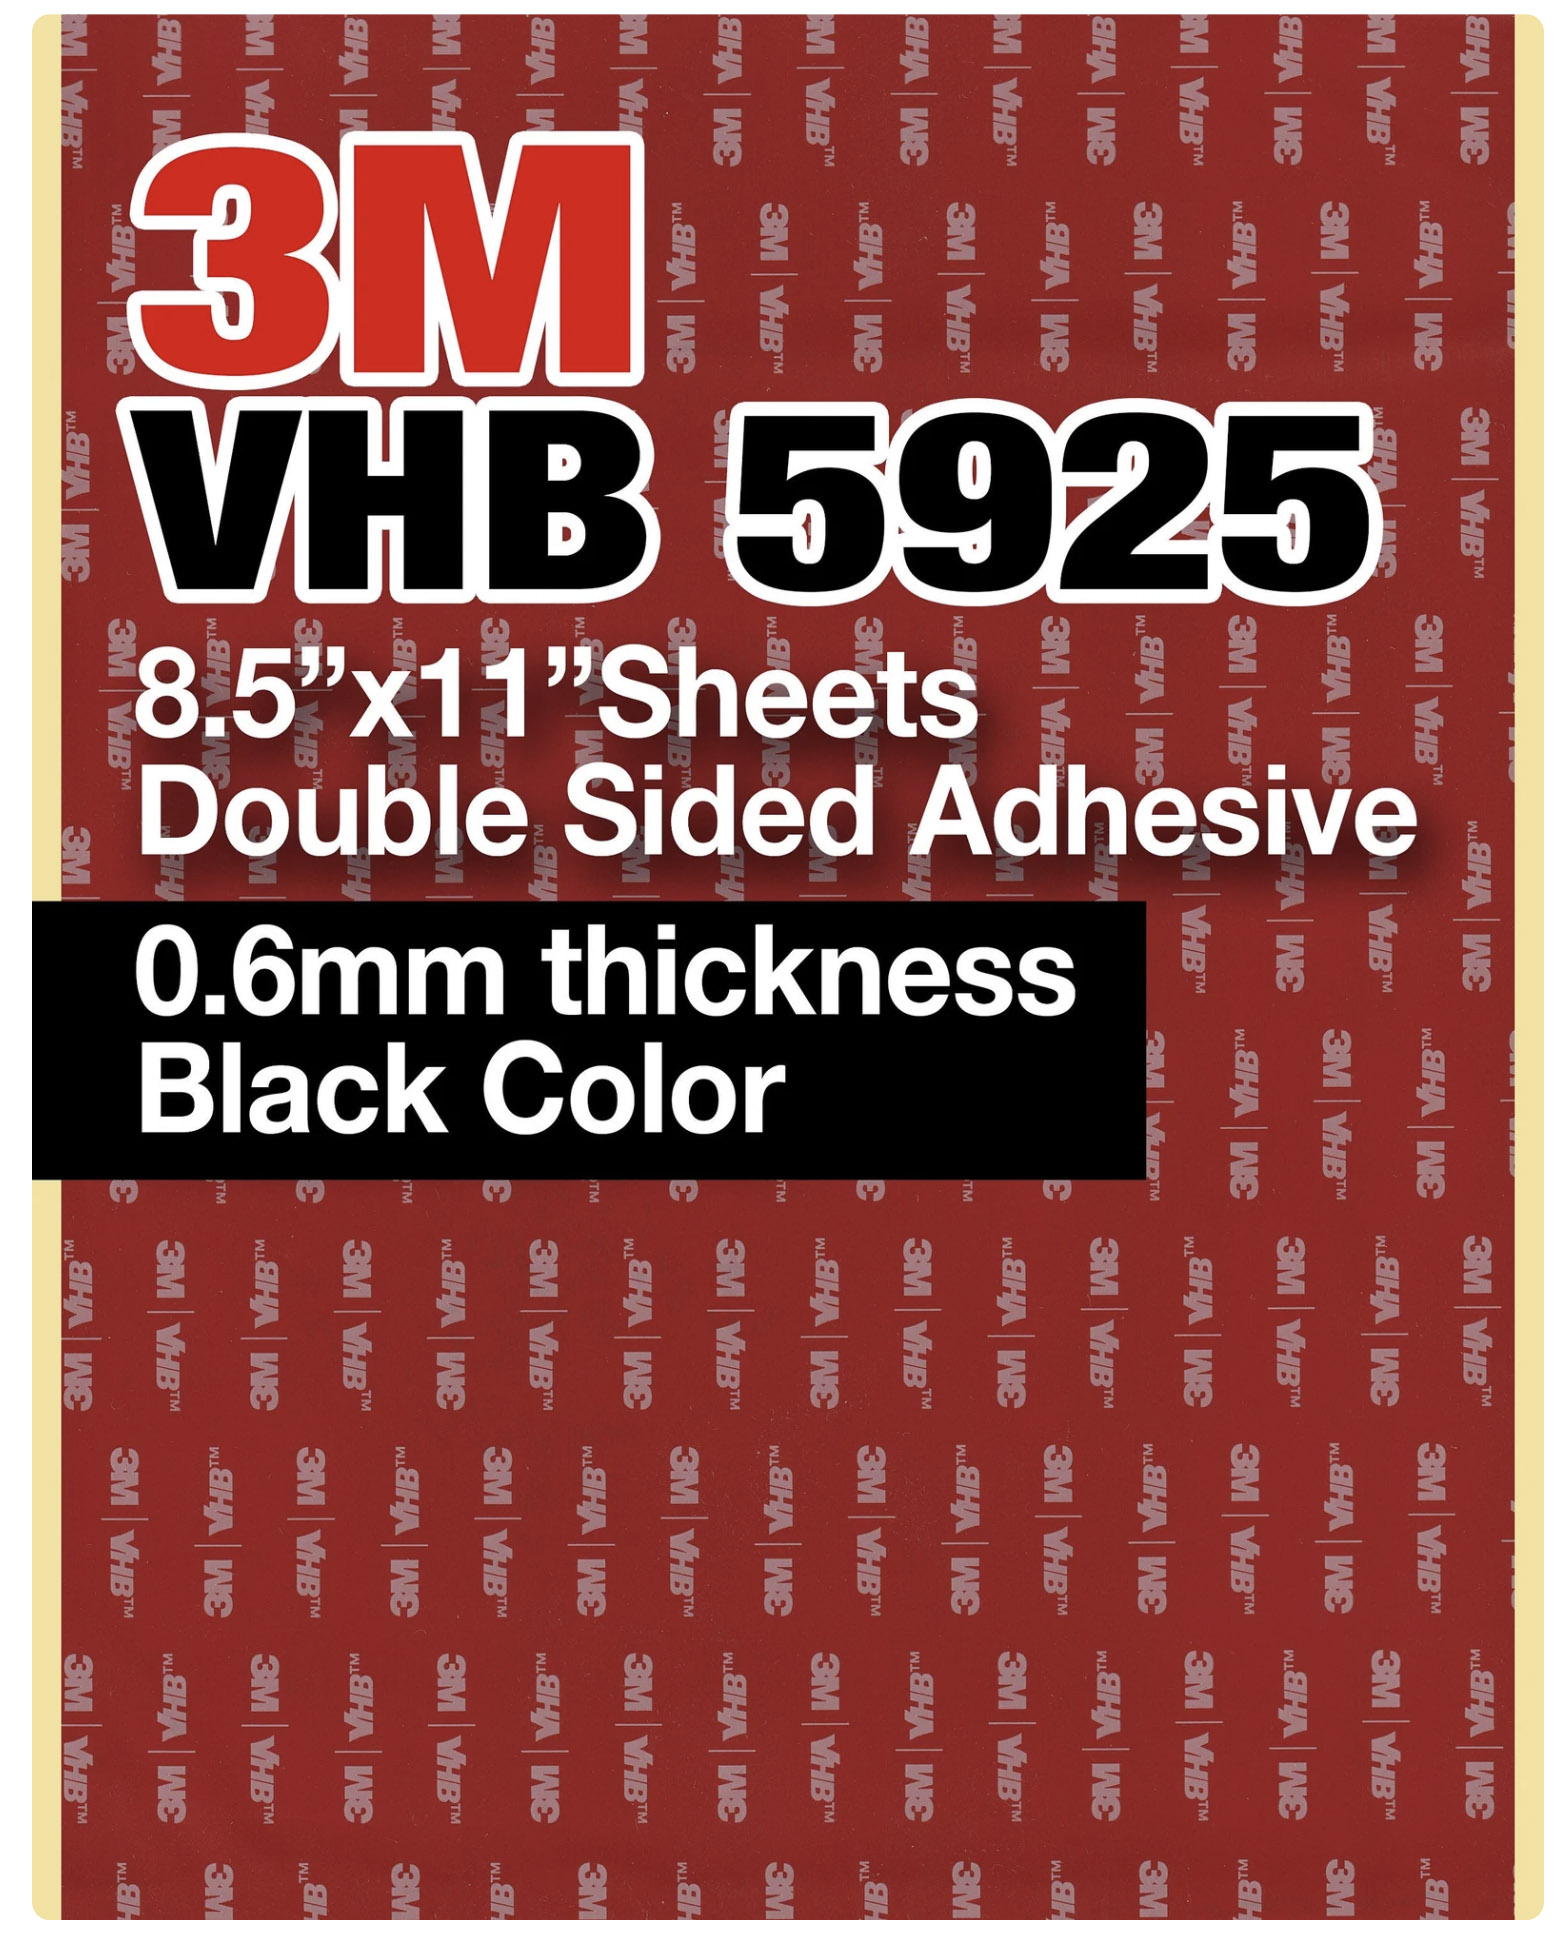 3M VHB 5925 8.5x11 Double Sided Strong Adhesive 0.6mm thickness black  sheets